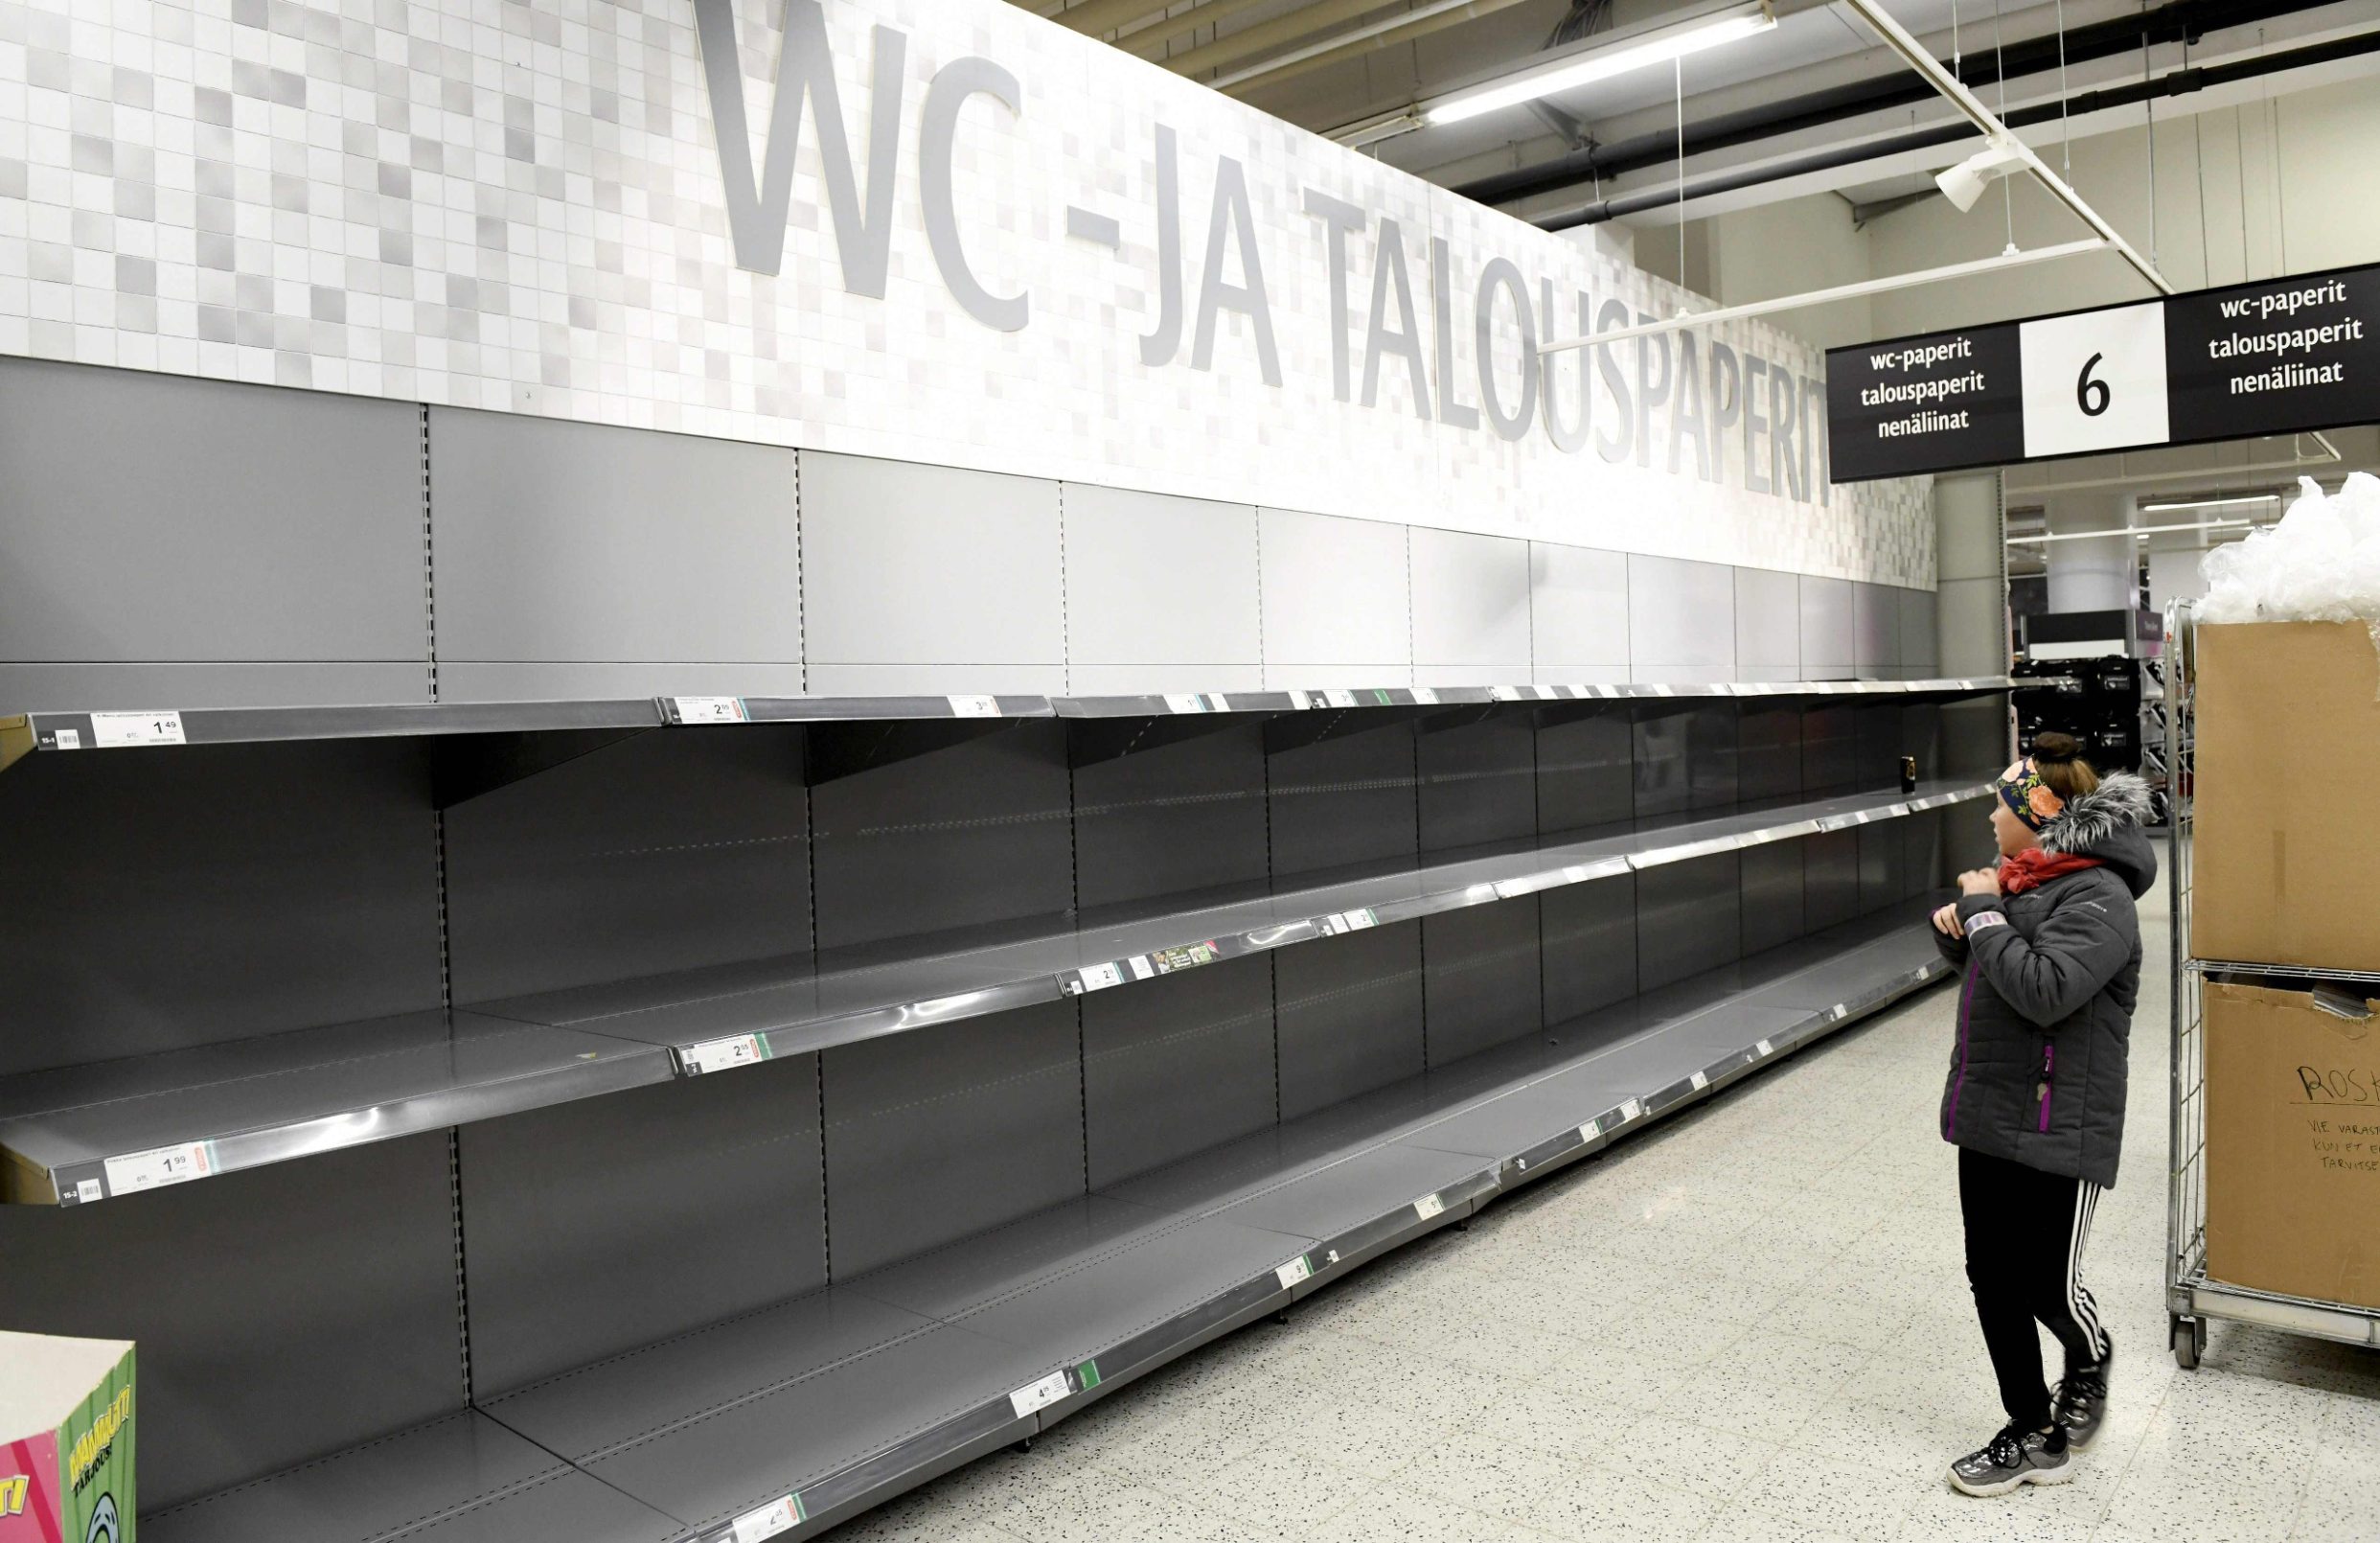 Empty toilet paper shelves are seen at a supermarket in Helsinki, Finland on March 13, 2020 as consumers worry about product shortages due to the outbreak of the novel coronavirus COVID-19. (Photo by Heikki Saukkomaa / Lehtikuva / AFP) / Finland OUT